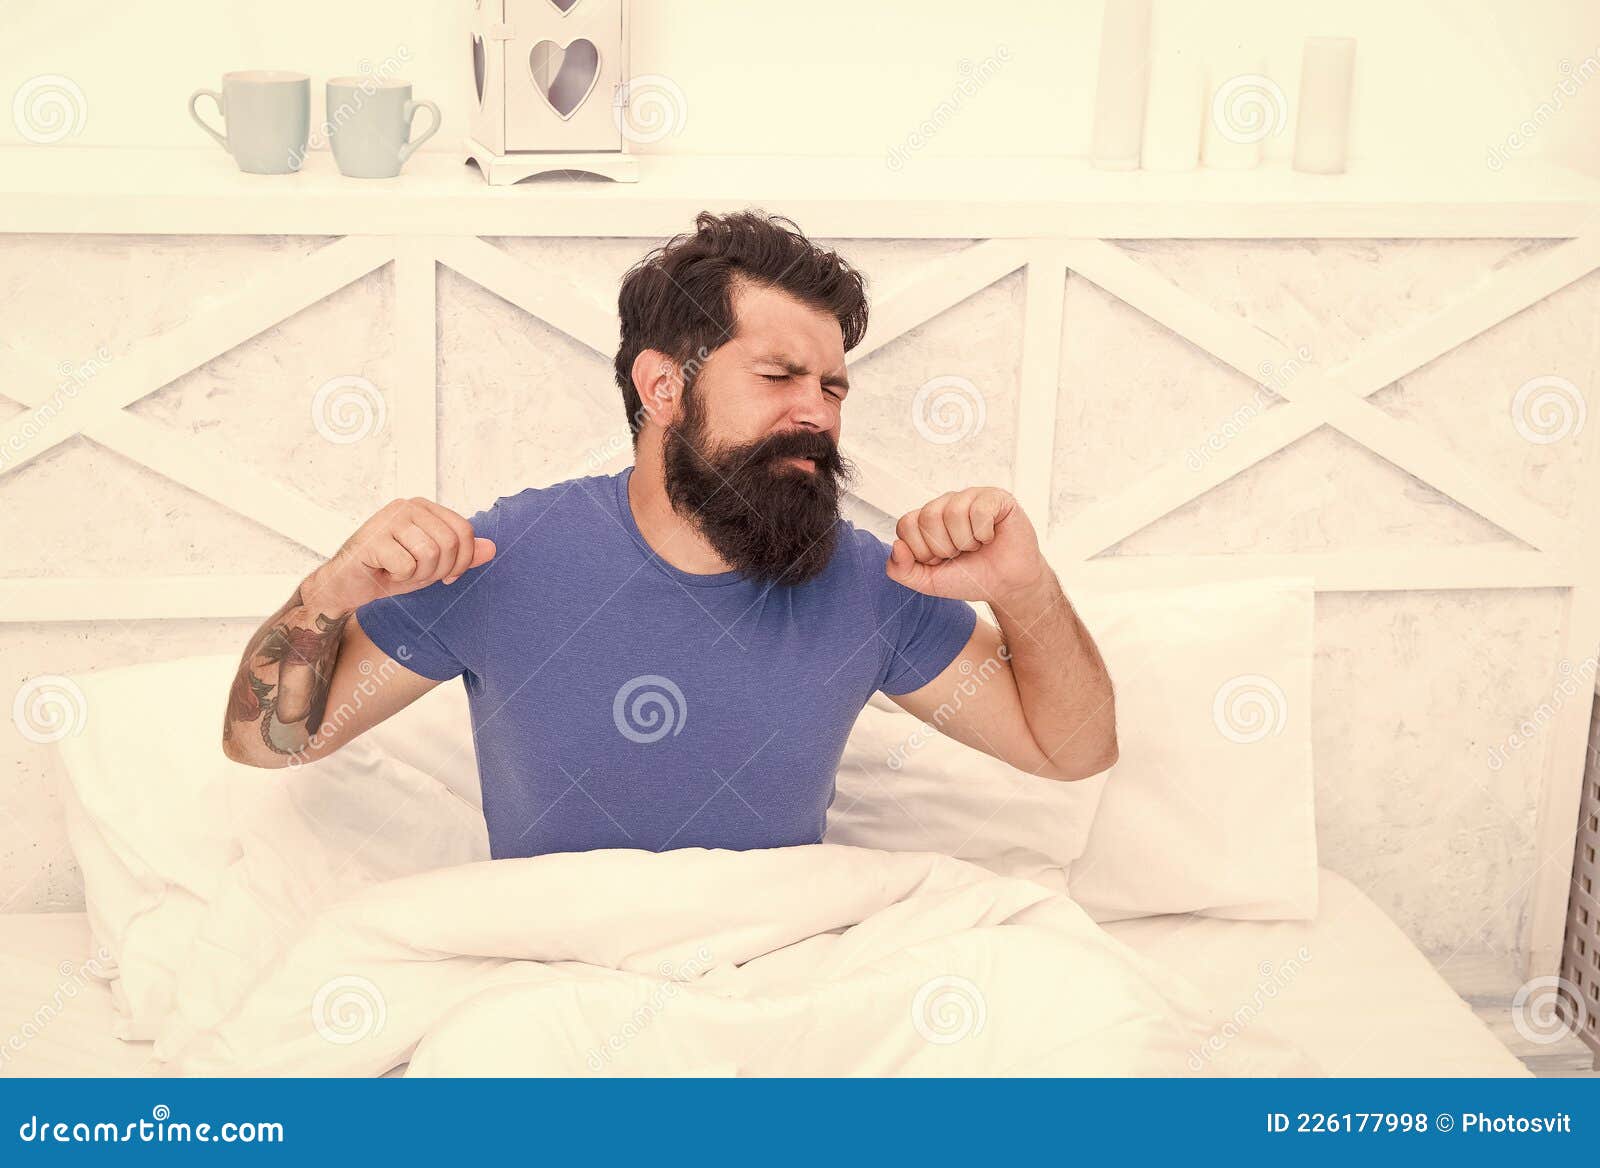 morning sleepiness. peaceful mature male relaxing. bearded man stretching in bed. sleepy guy relax in bedroom. early